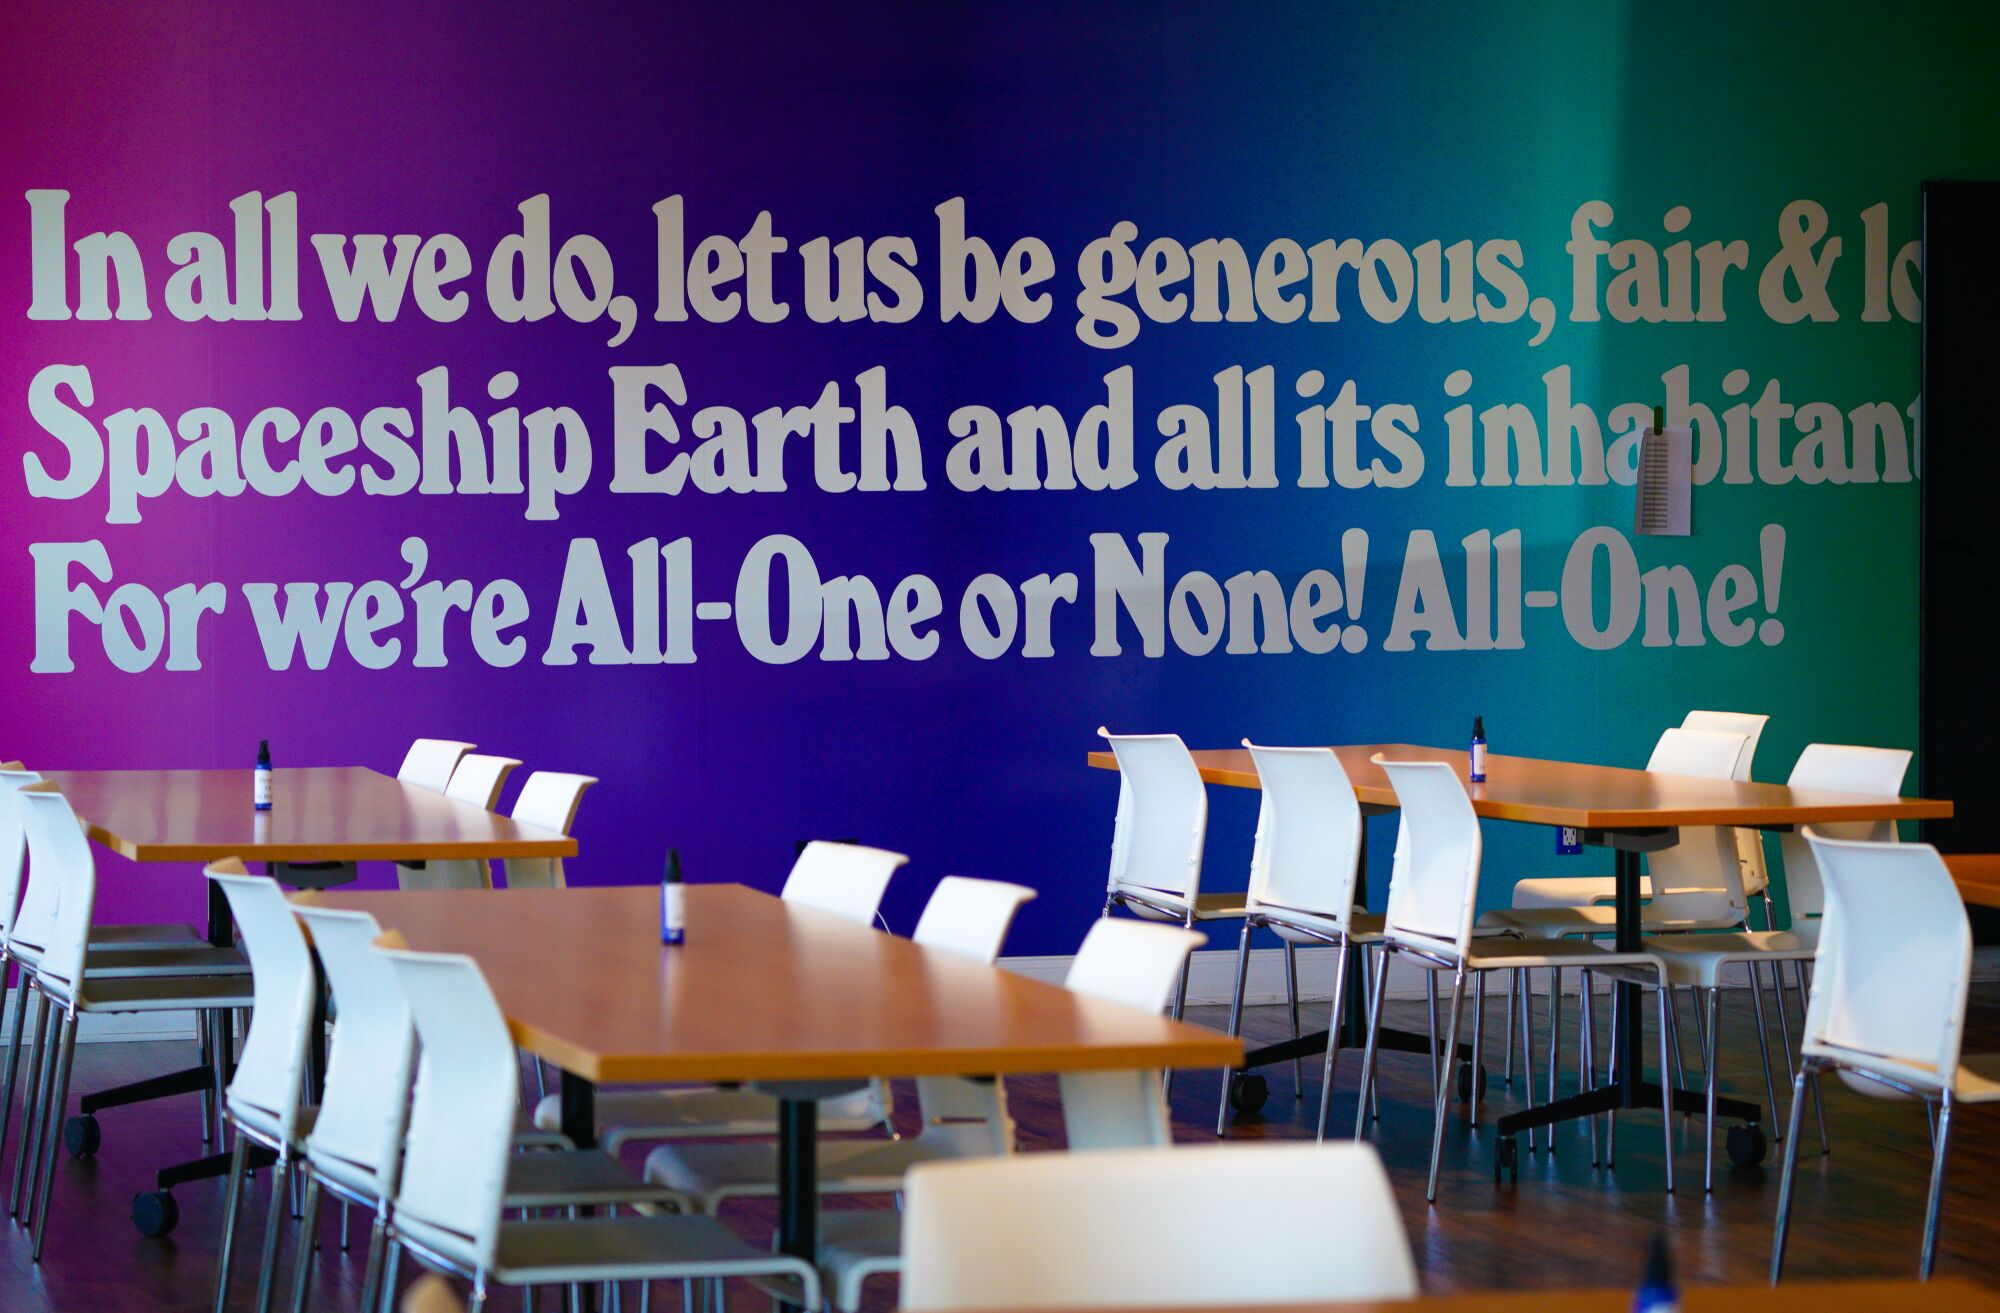 Tables and chairs in a room with a saying on the wall at Dr. Bronner's headquarters.